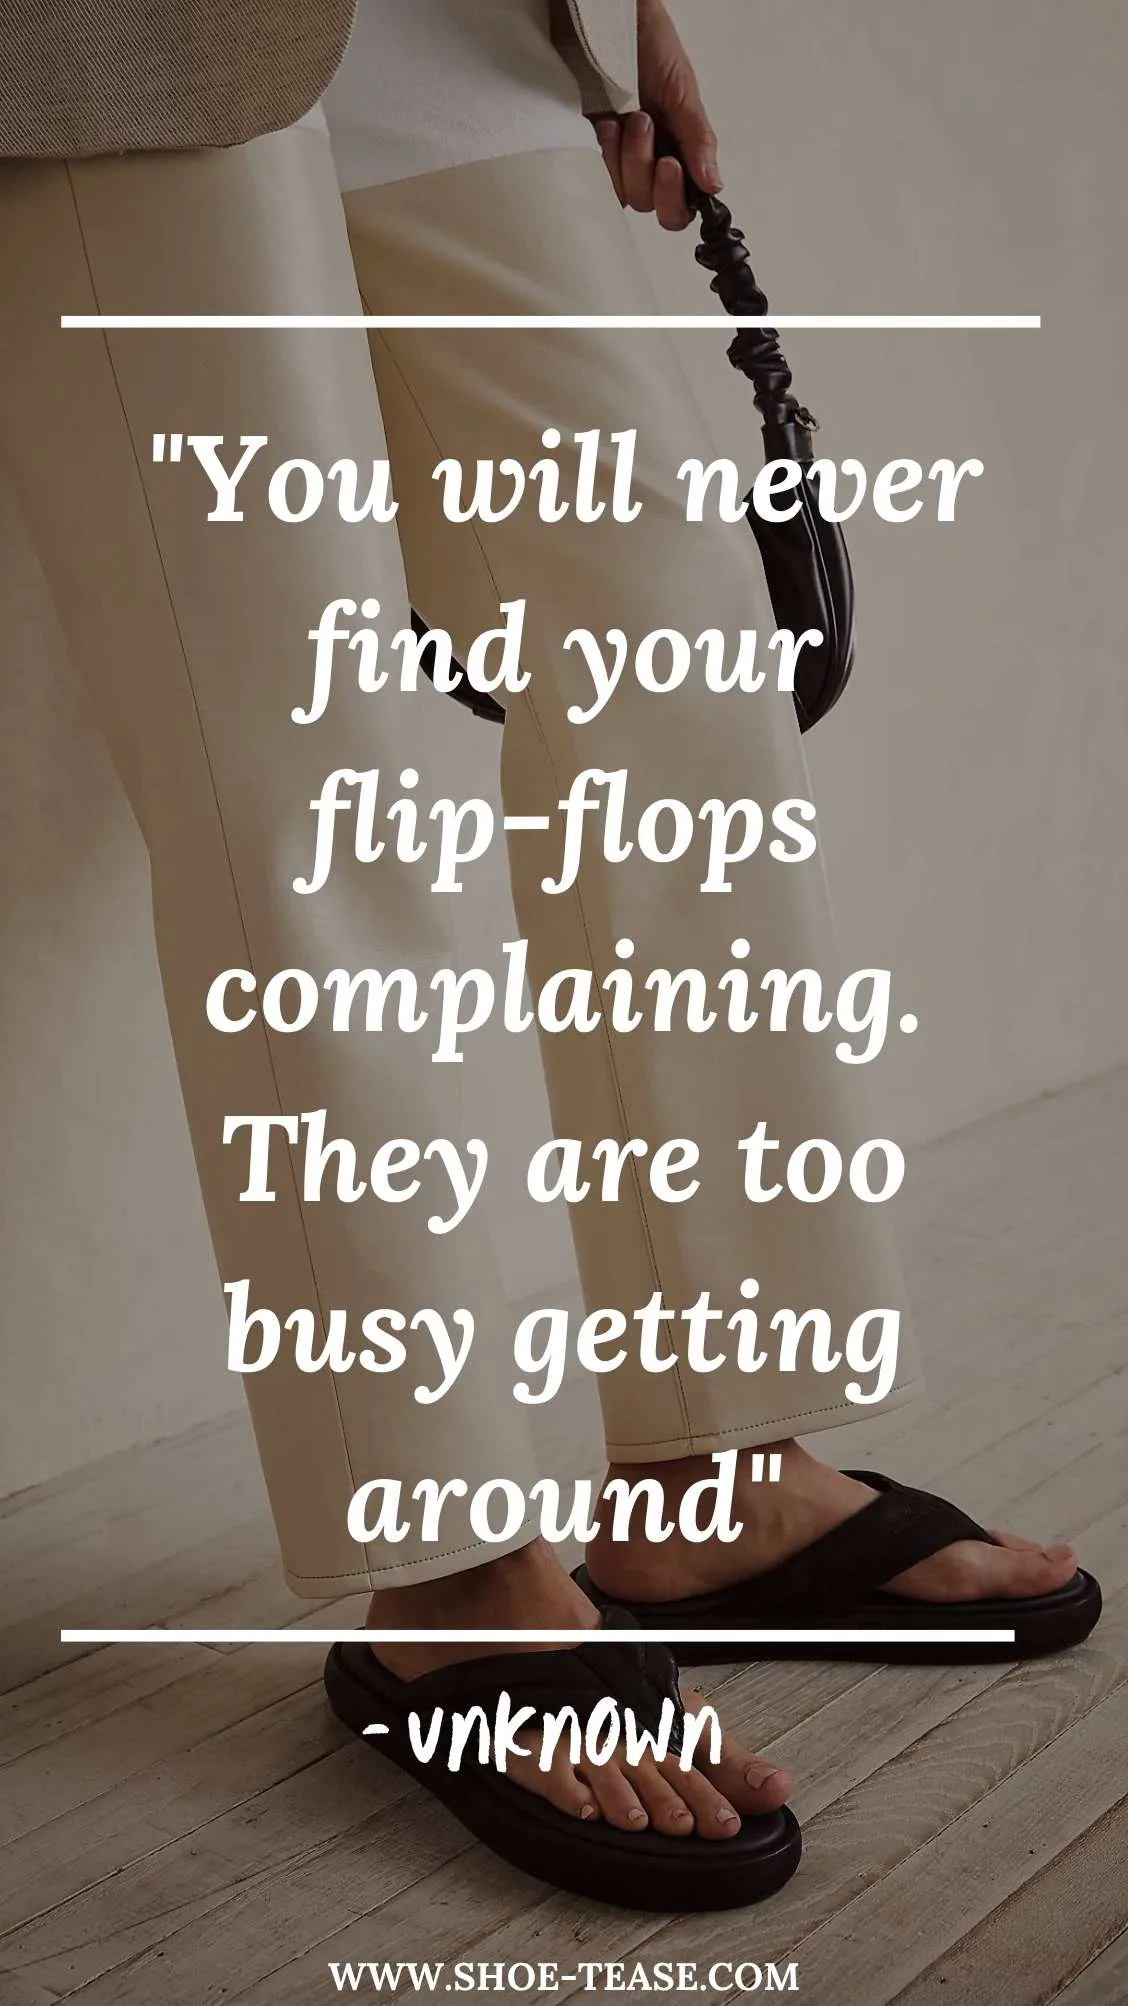 Flip flop quote reading You will never find your flip flops complaining. They are too busy getting around over image of women's legs wearing beige pants and flip flops..